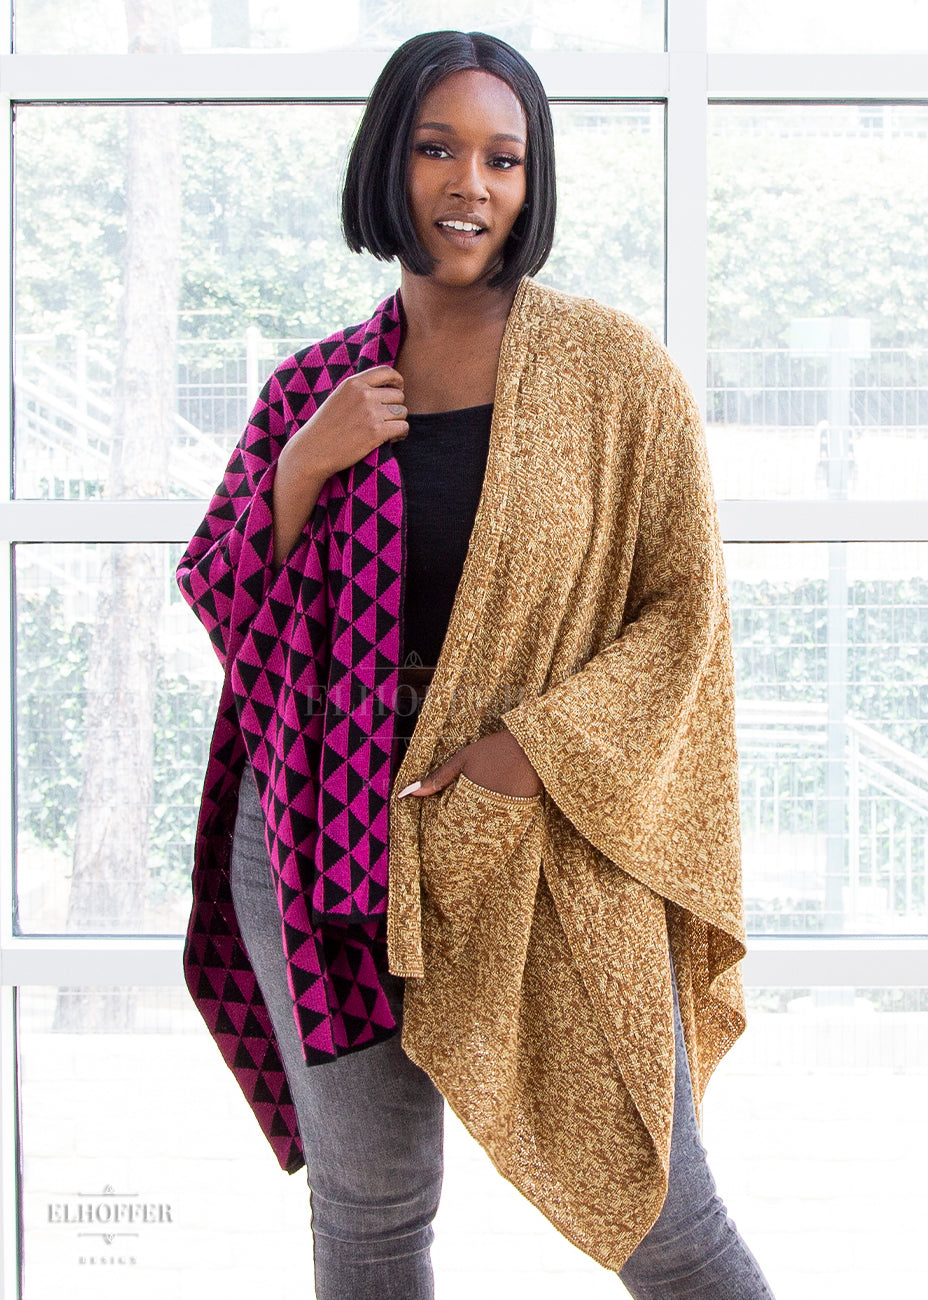 Lynsi, a dark haired dark skinned size L model, wears the poncho with one hand on the collar of the black and pink triangle side and a hand in the pocket of the golden mustard side. She has paired it with a black top and grey jeans.